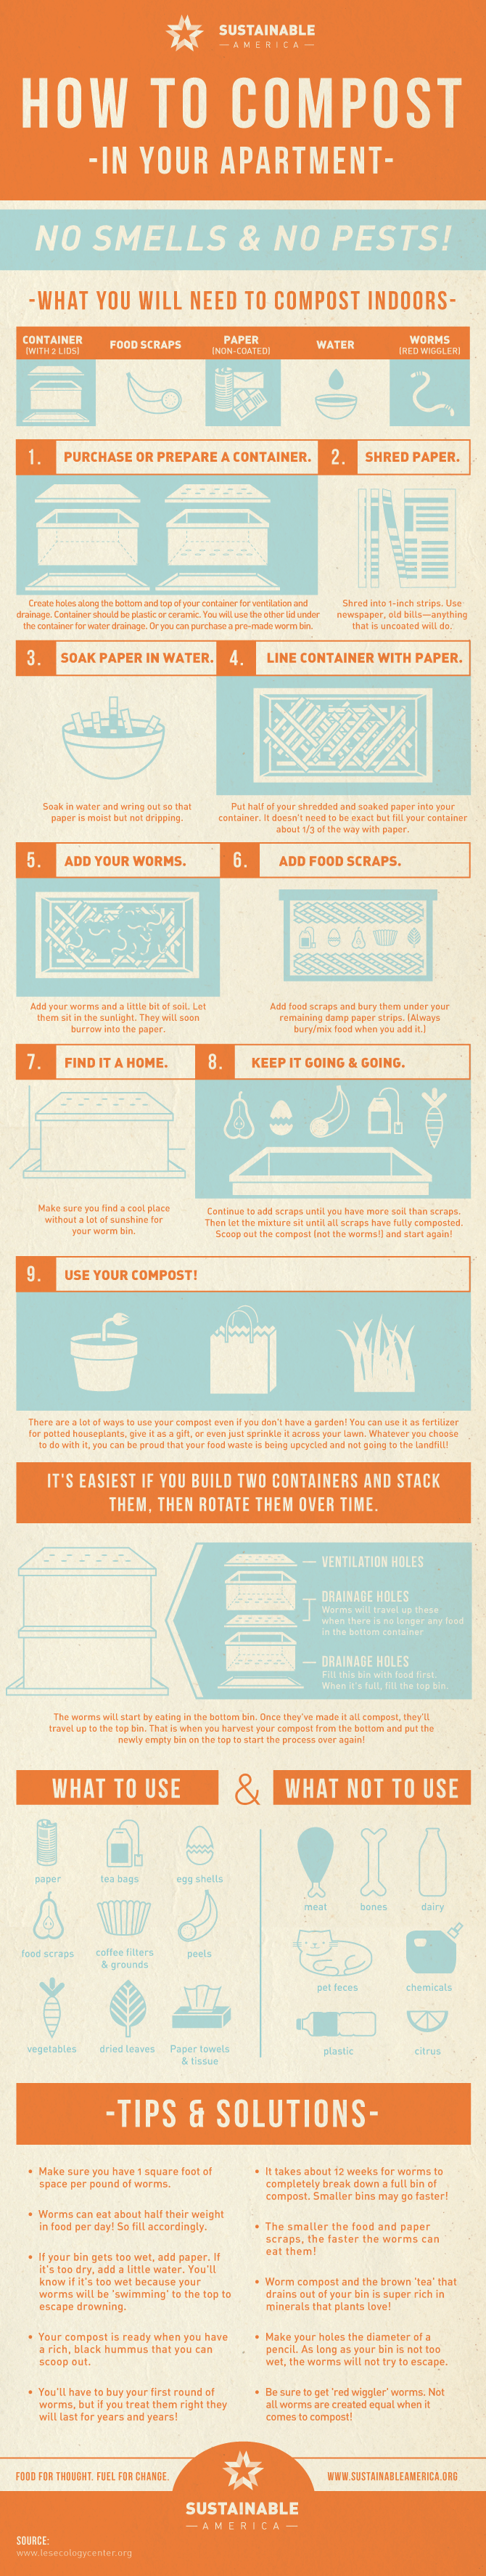 http://dailyinfographic.com/wp-content/uploads/2013/10/How-To-Compost-in-Your-Apartment.png